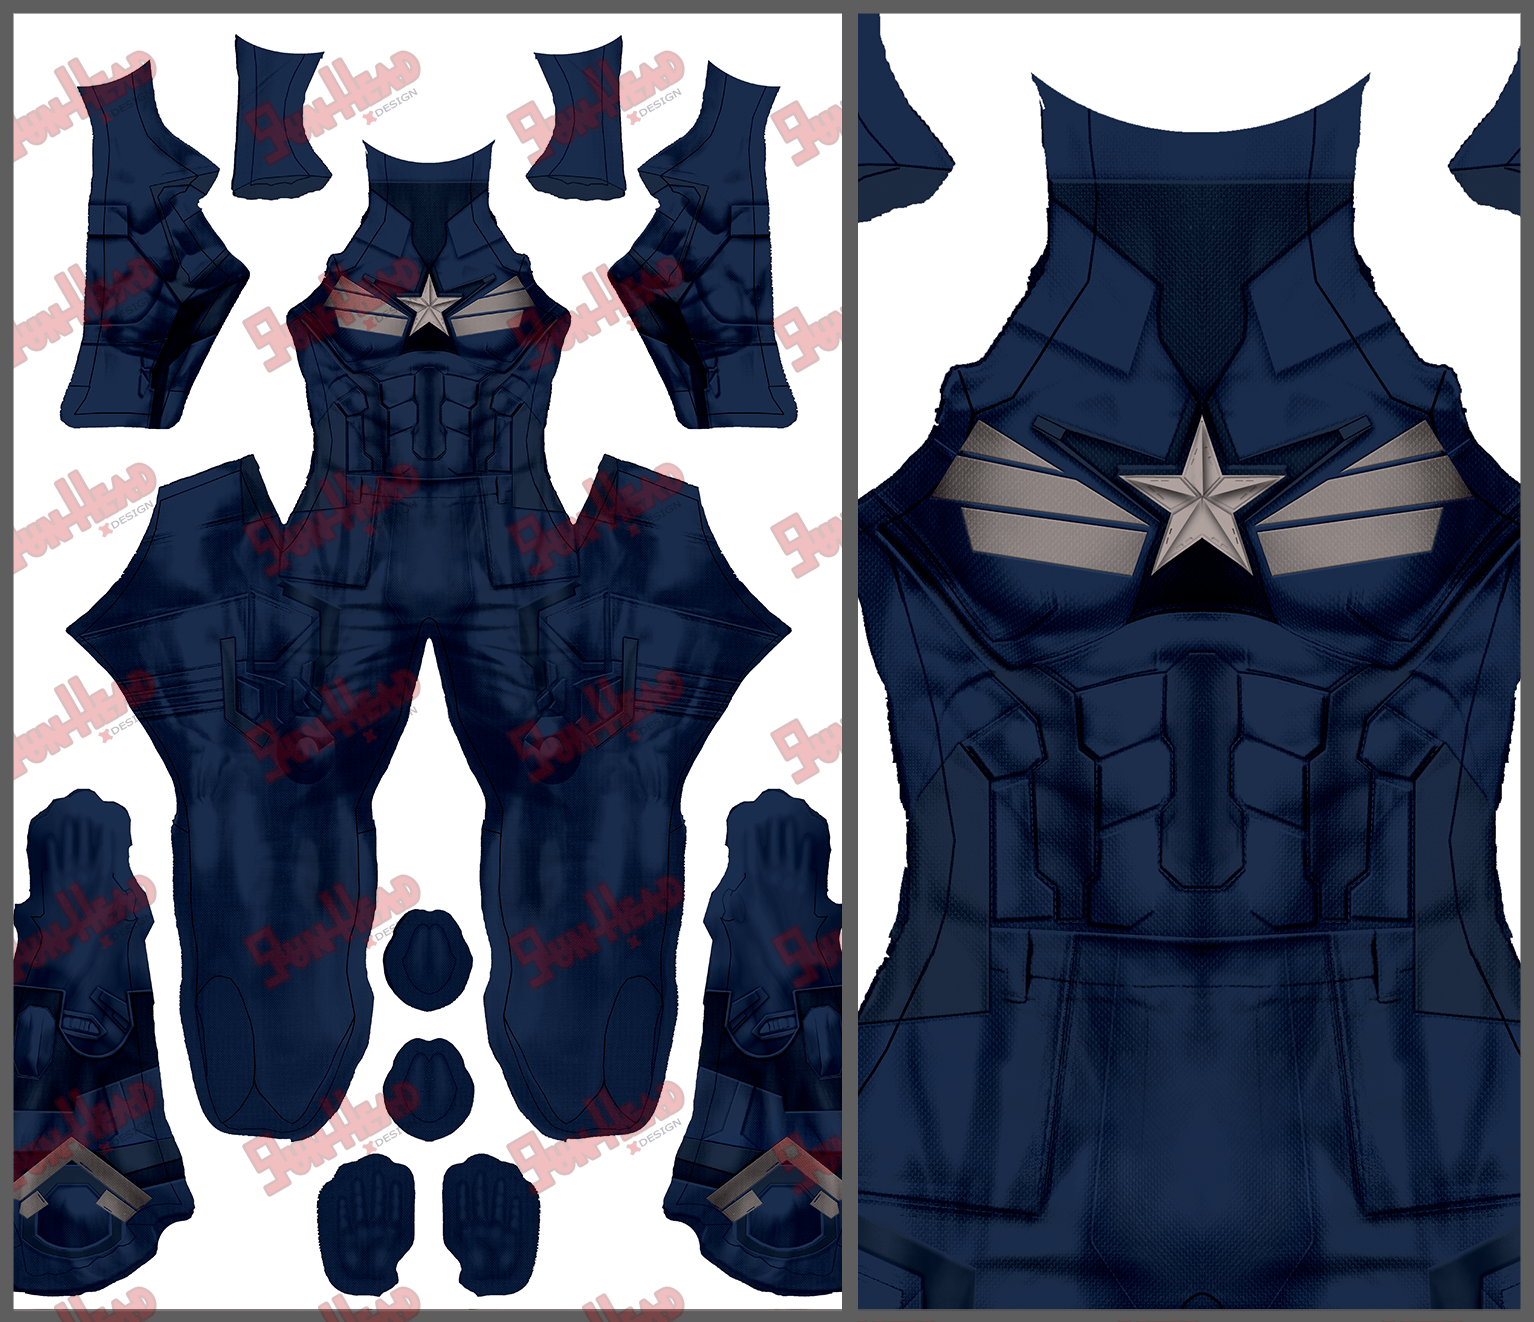 https://gunheaddesign.com/wp-content/uploads/2020/01/Captain-America-Stealth-Suit-Preview.png